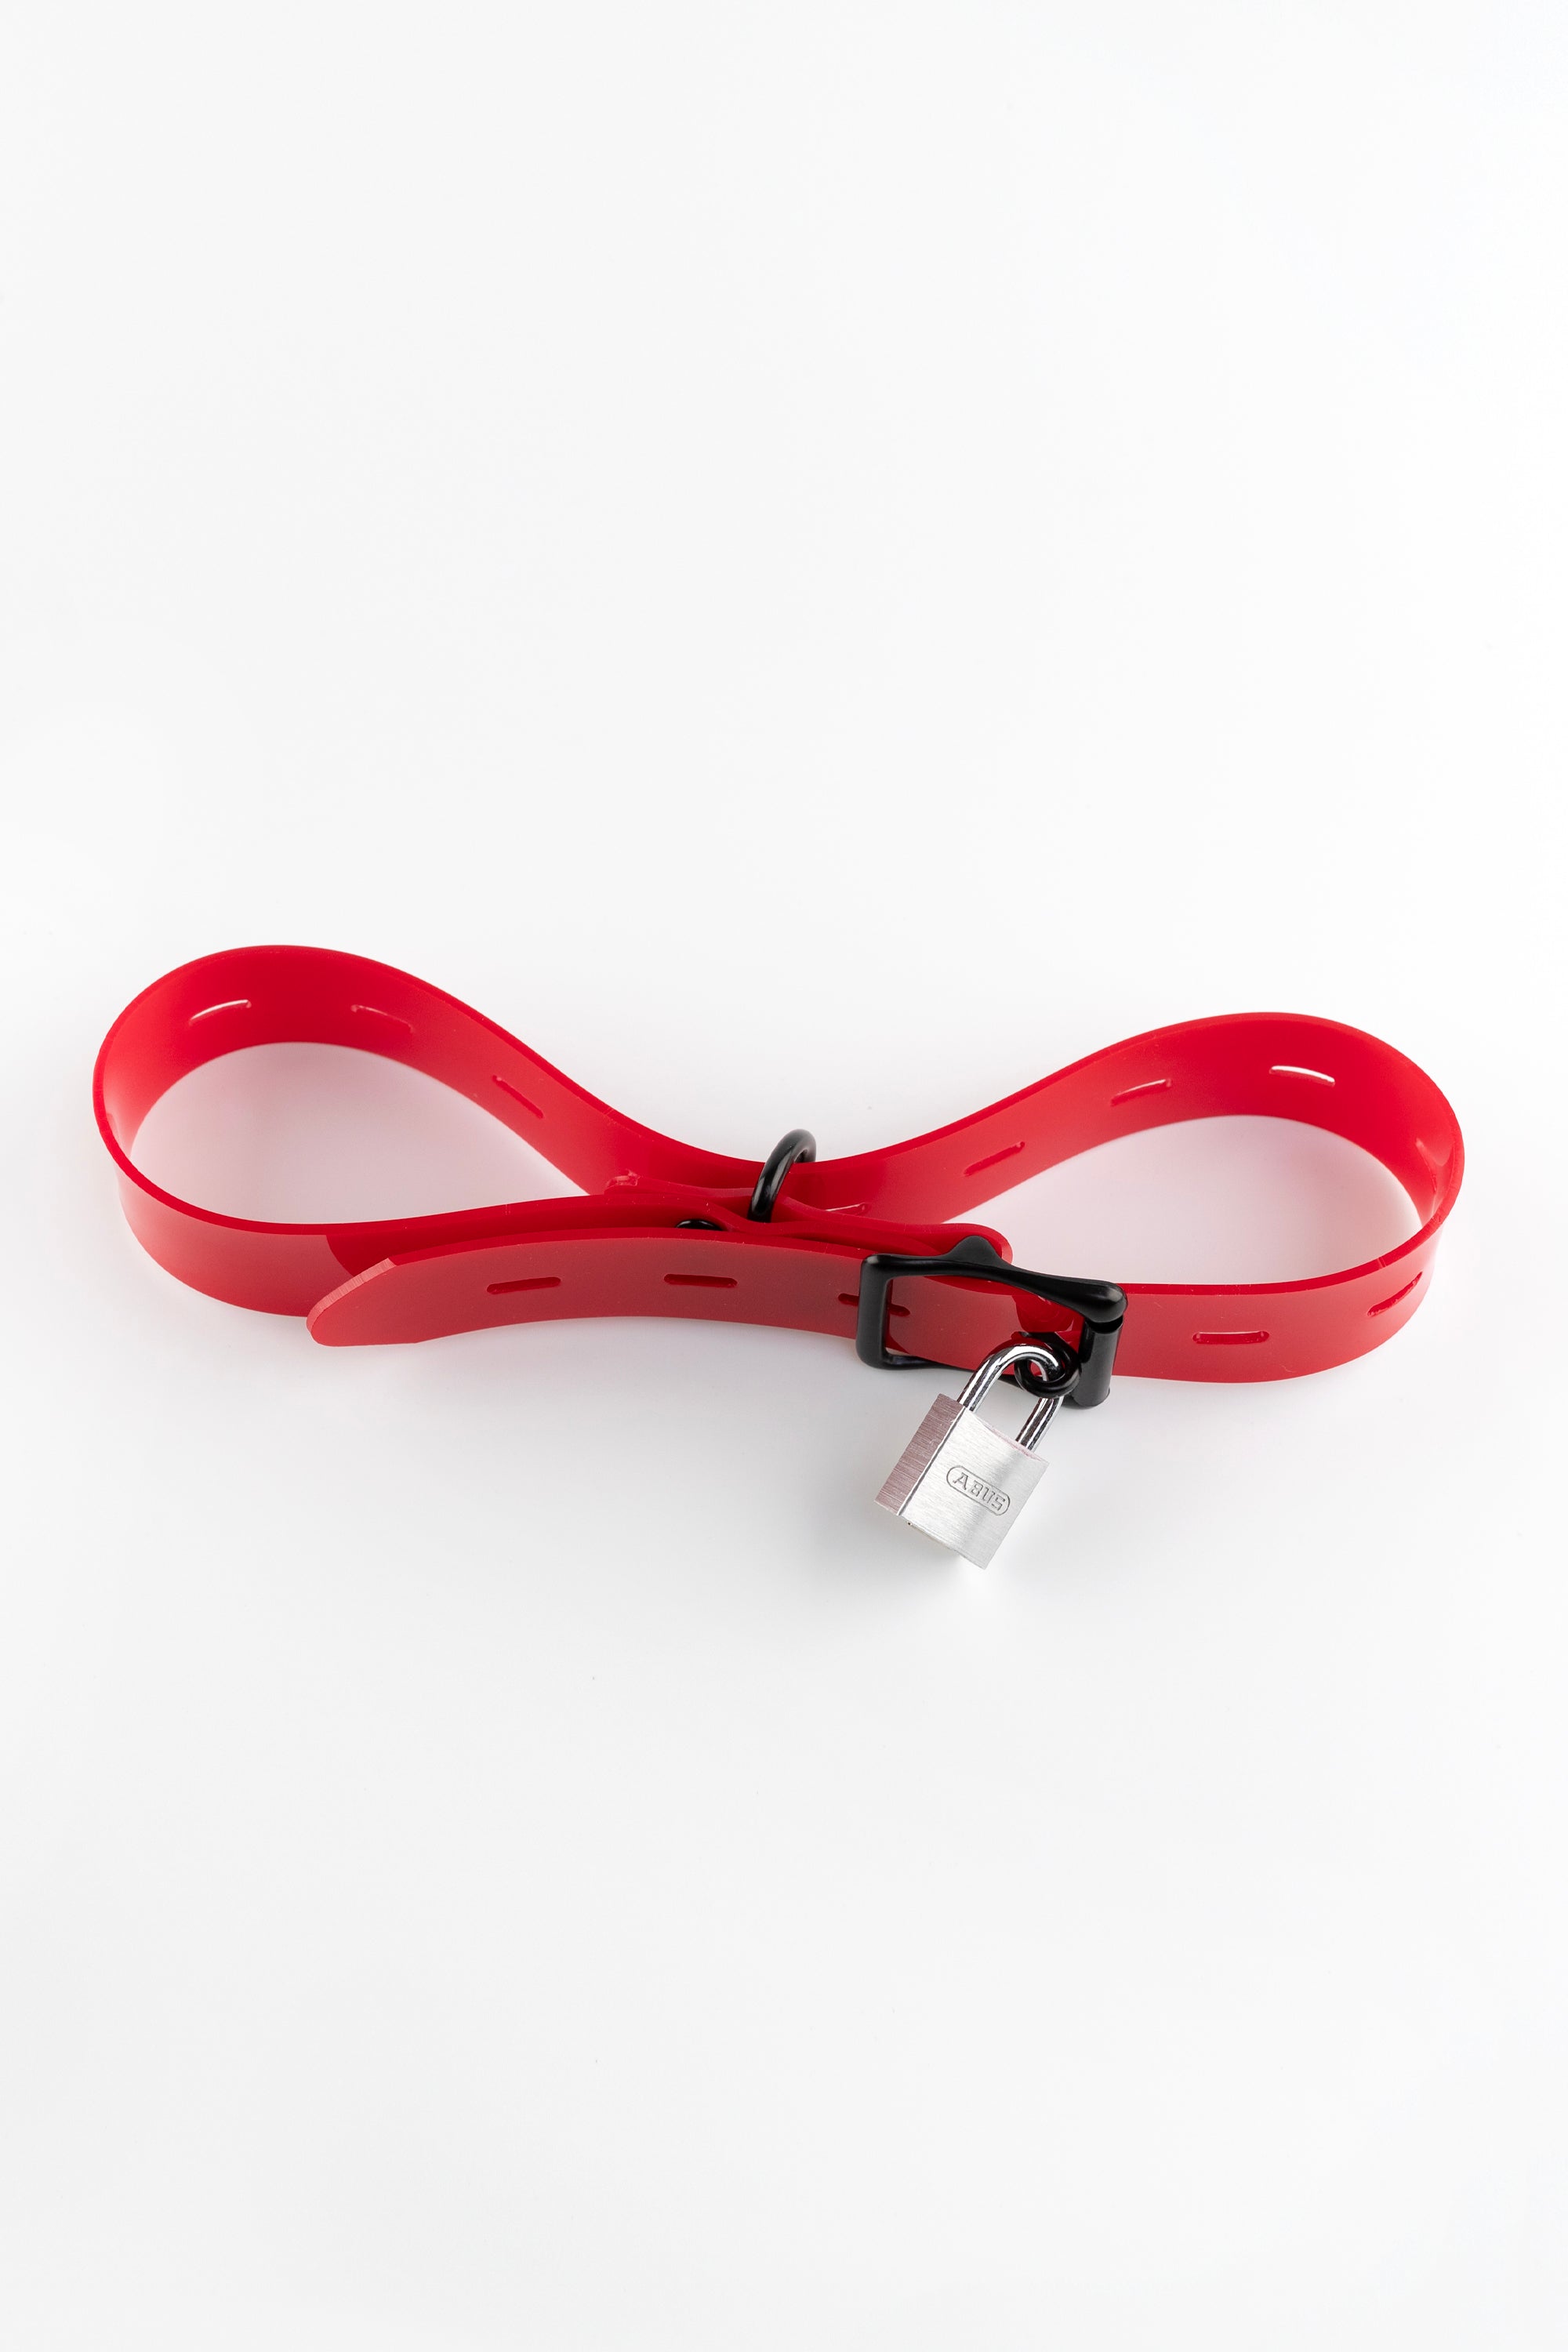 Bondage PVC strap with lockable buckle 25 mm, different lengths, red/black